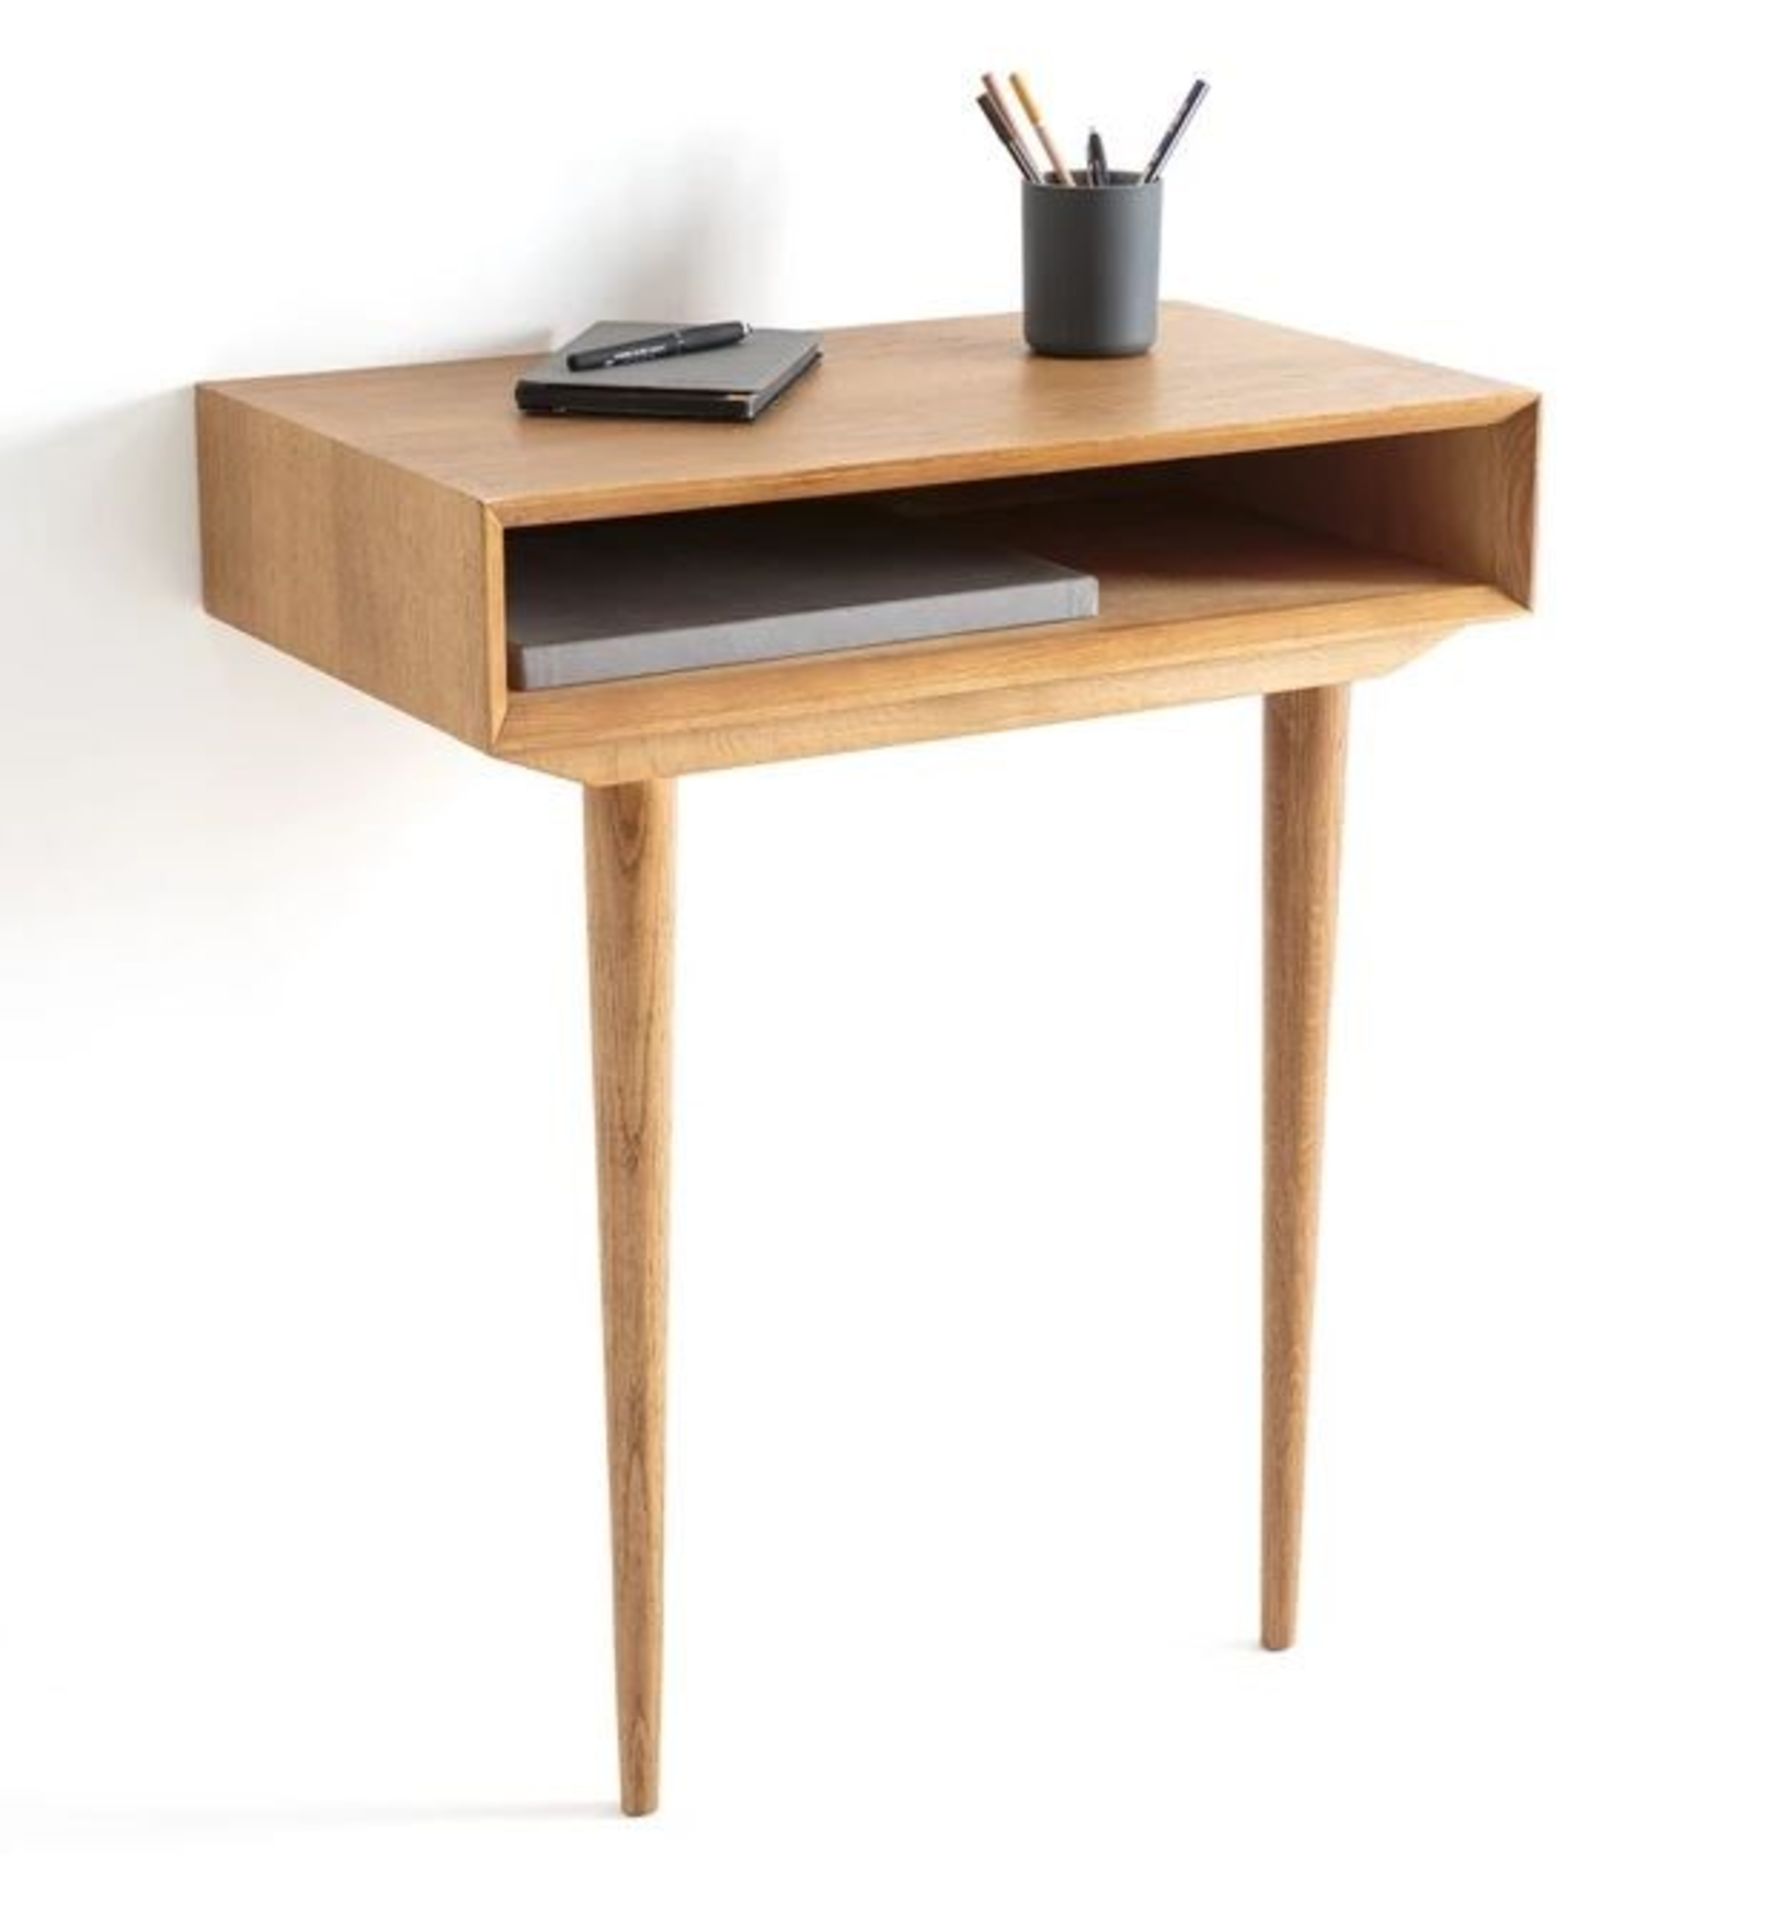 LA REDOUTE QUILDA OAK WALL-MOUNTED CONSOLE TABLE